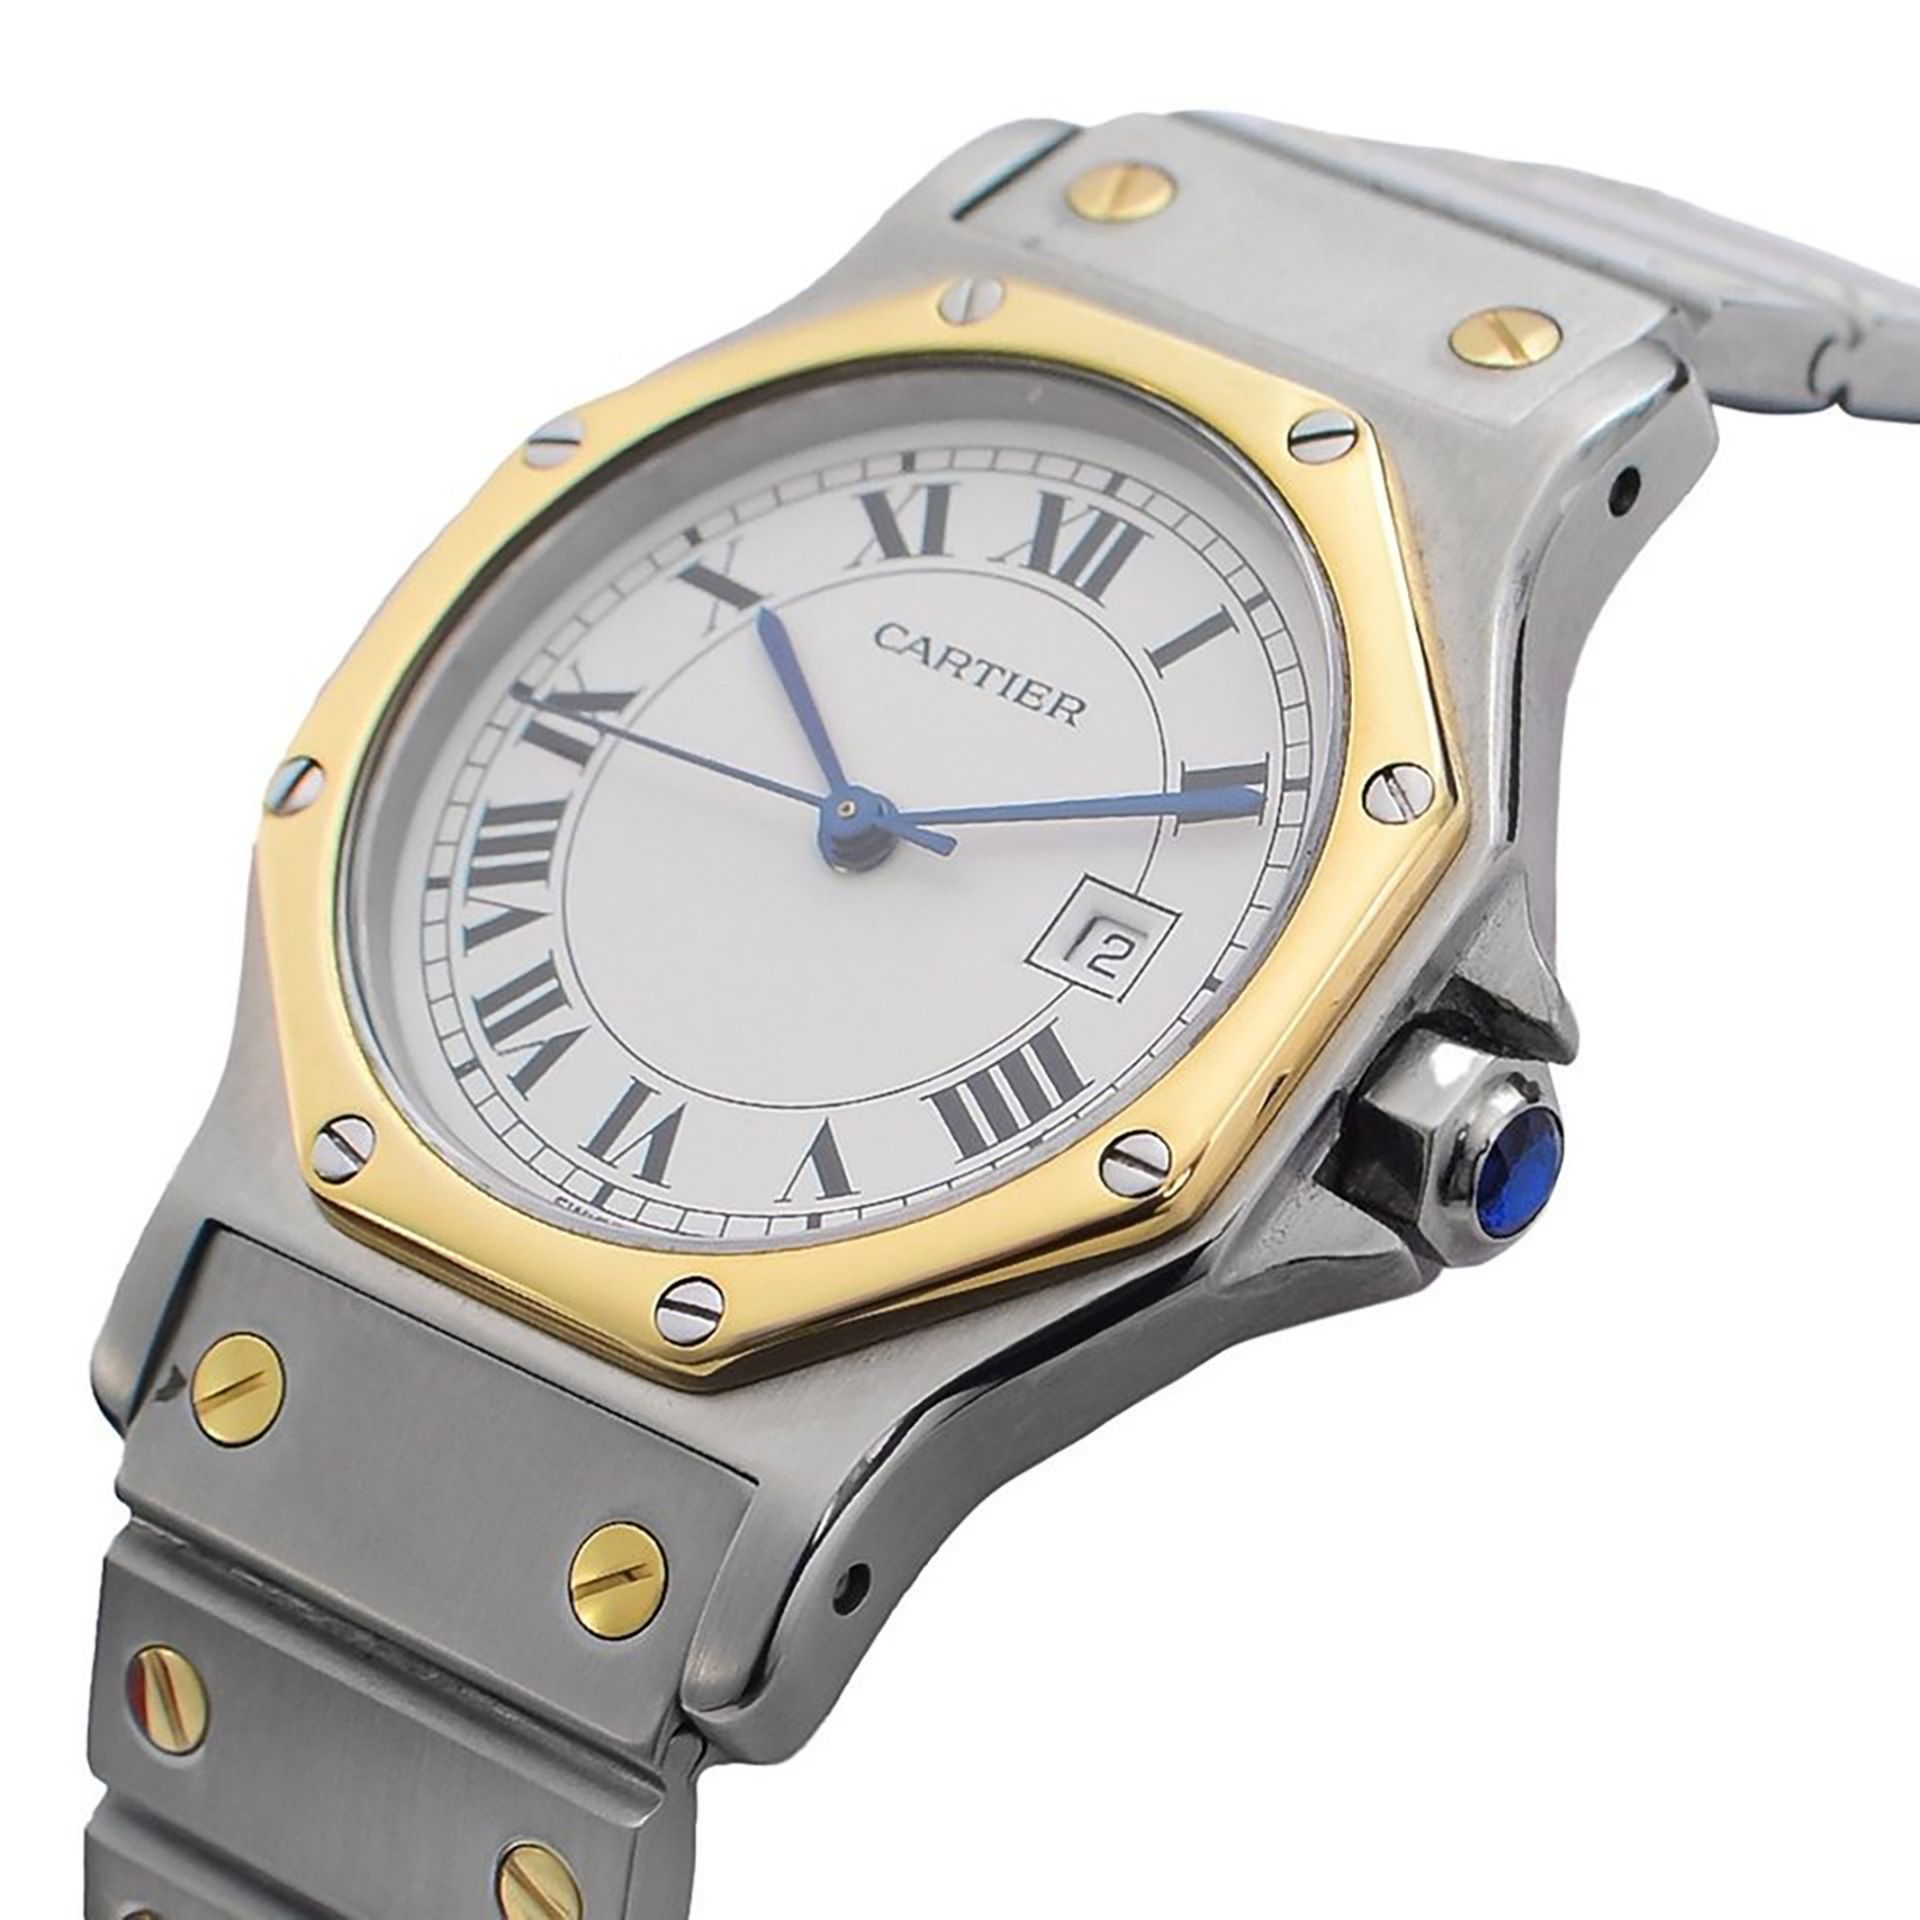 Cartier Santos Octagon wristwatch in steel and gold from the 80s - Image 2 of 5